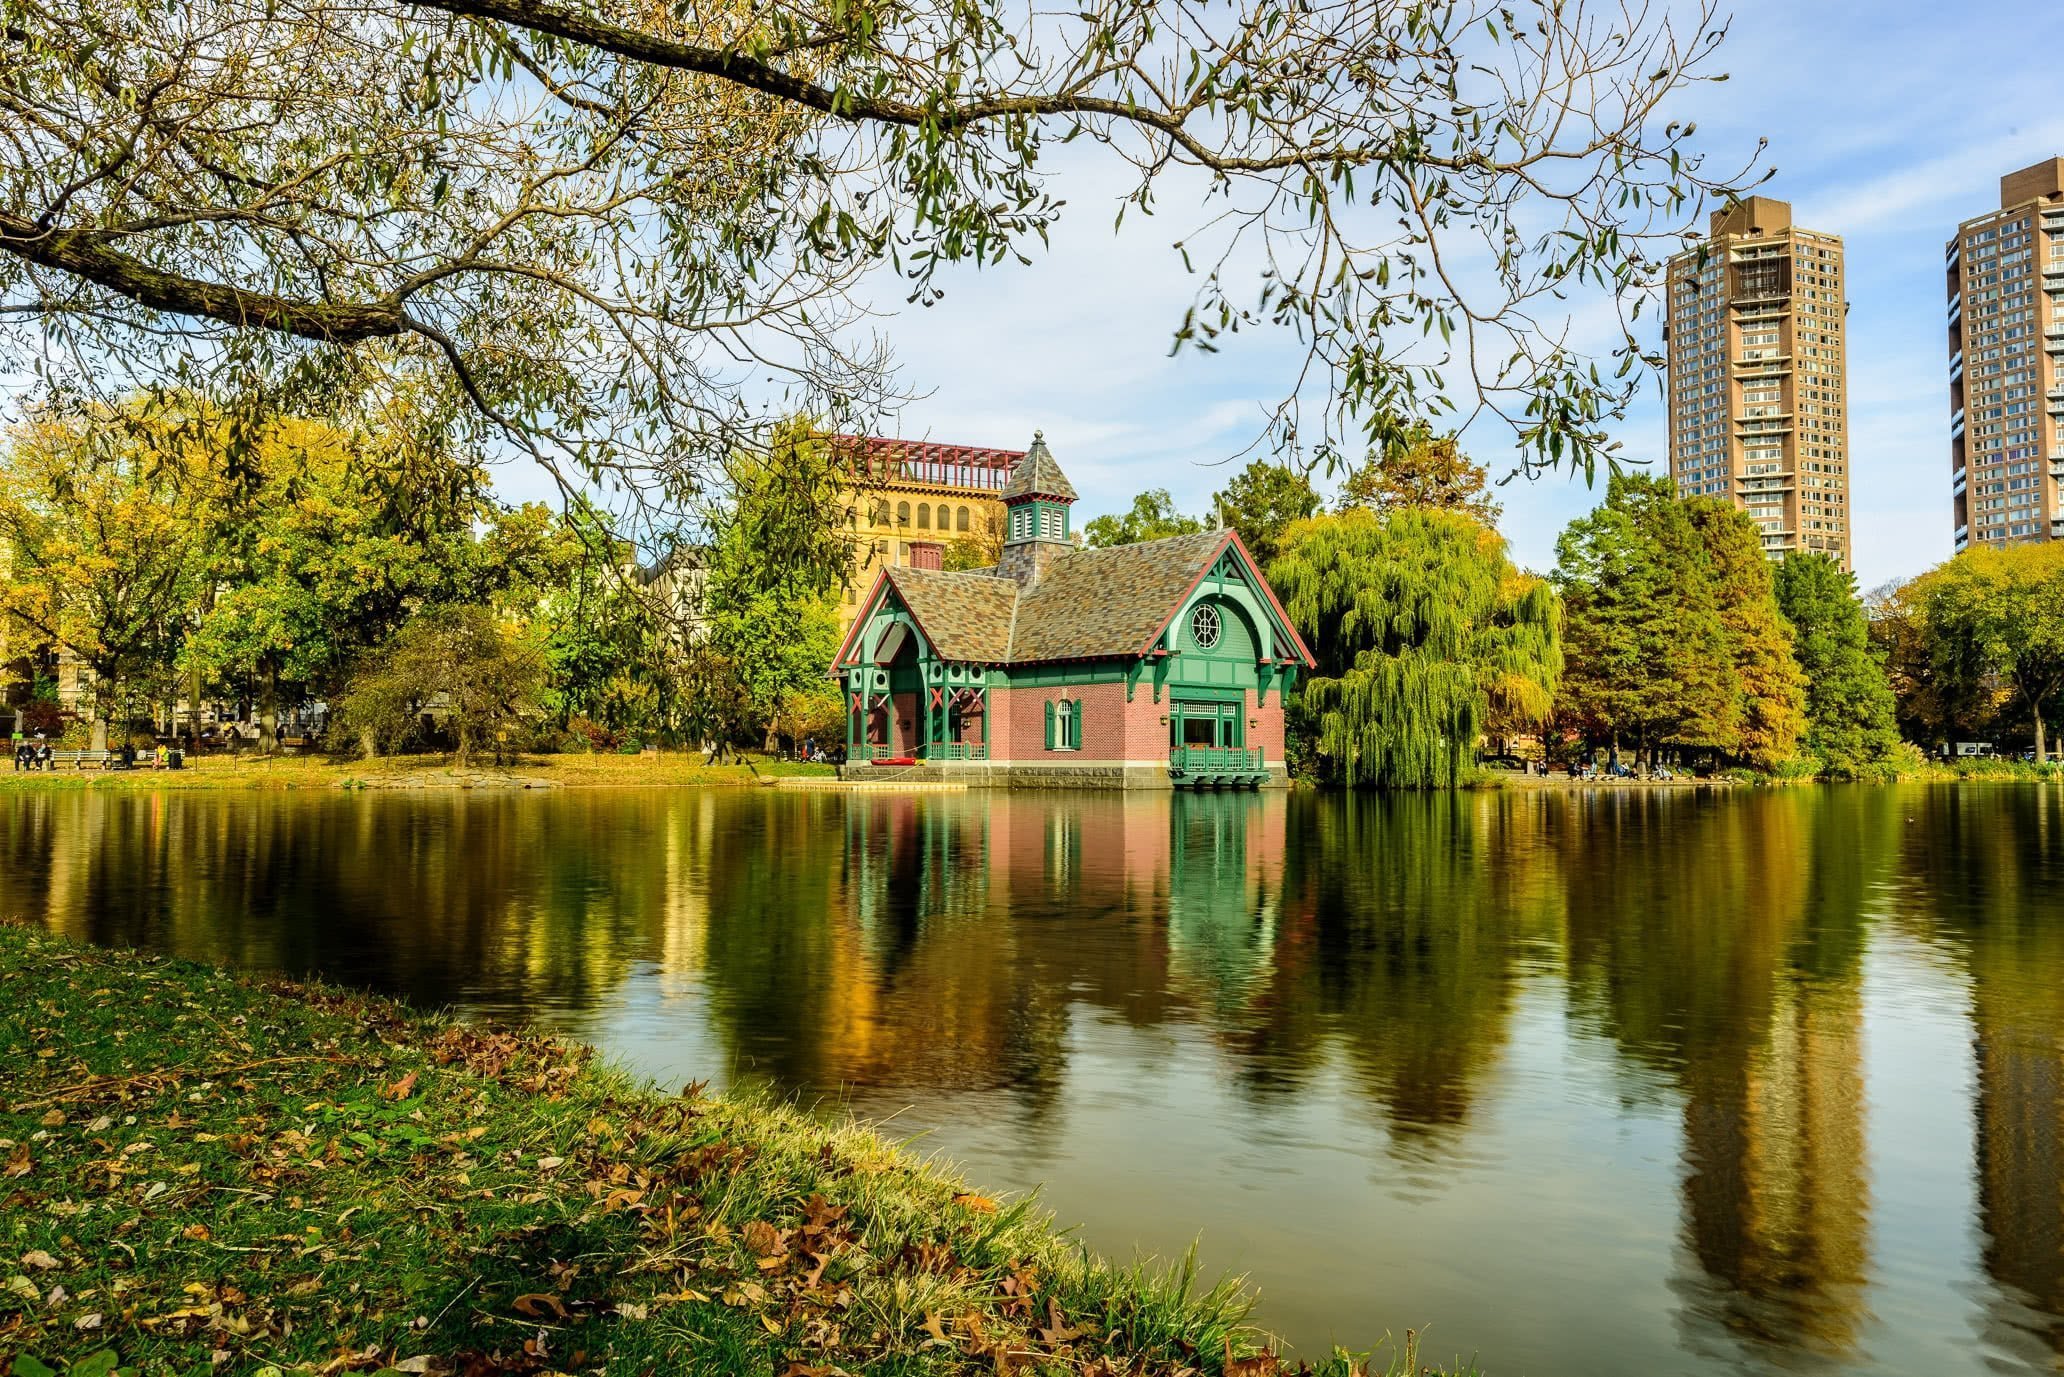 Central Park, Harlem Meer and Charles A. Dana Discovery Center